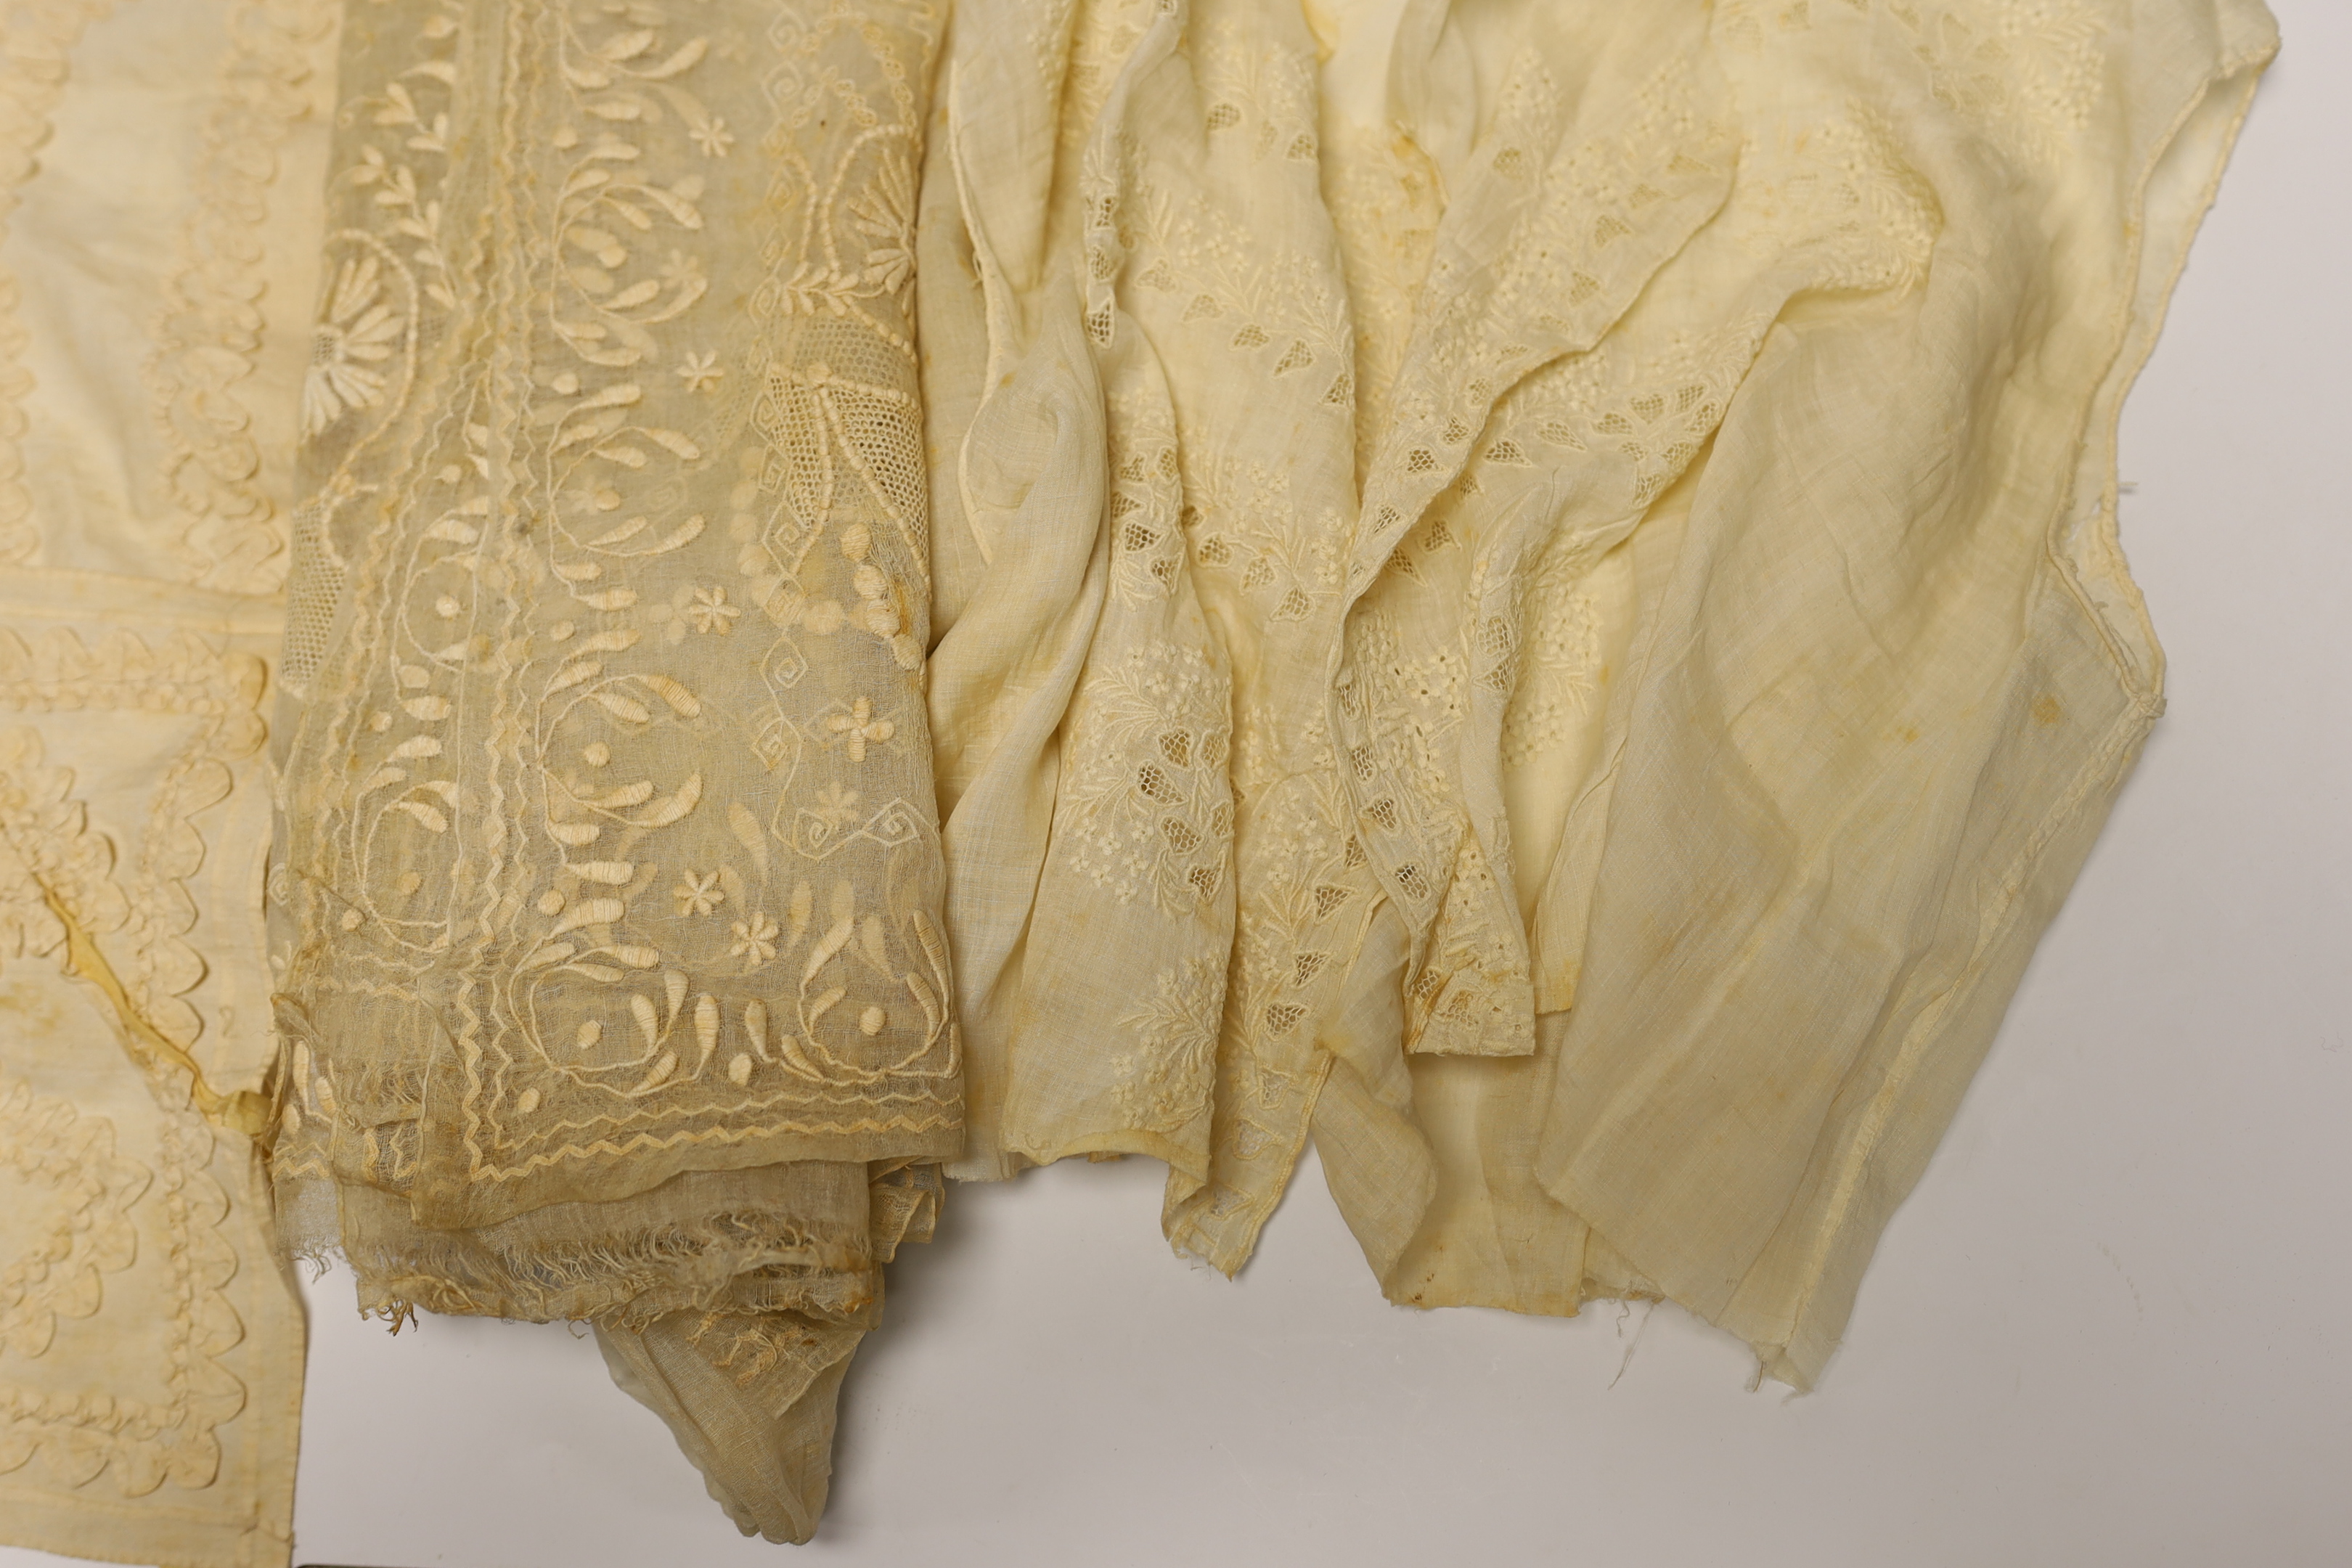 An 18th century Dresden worked apron, a white worked fine lawn stole, two panels of linen ribbon work, a ladies lace bonnet a similar pink satin bonnet a white worked blouse (partially made) and panel to a christening go